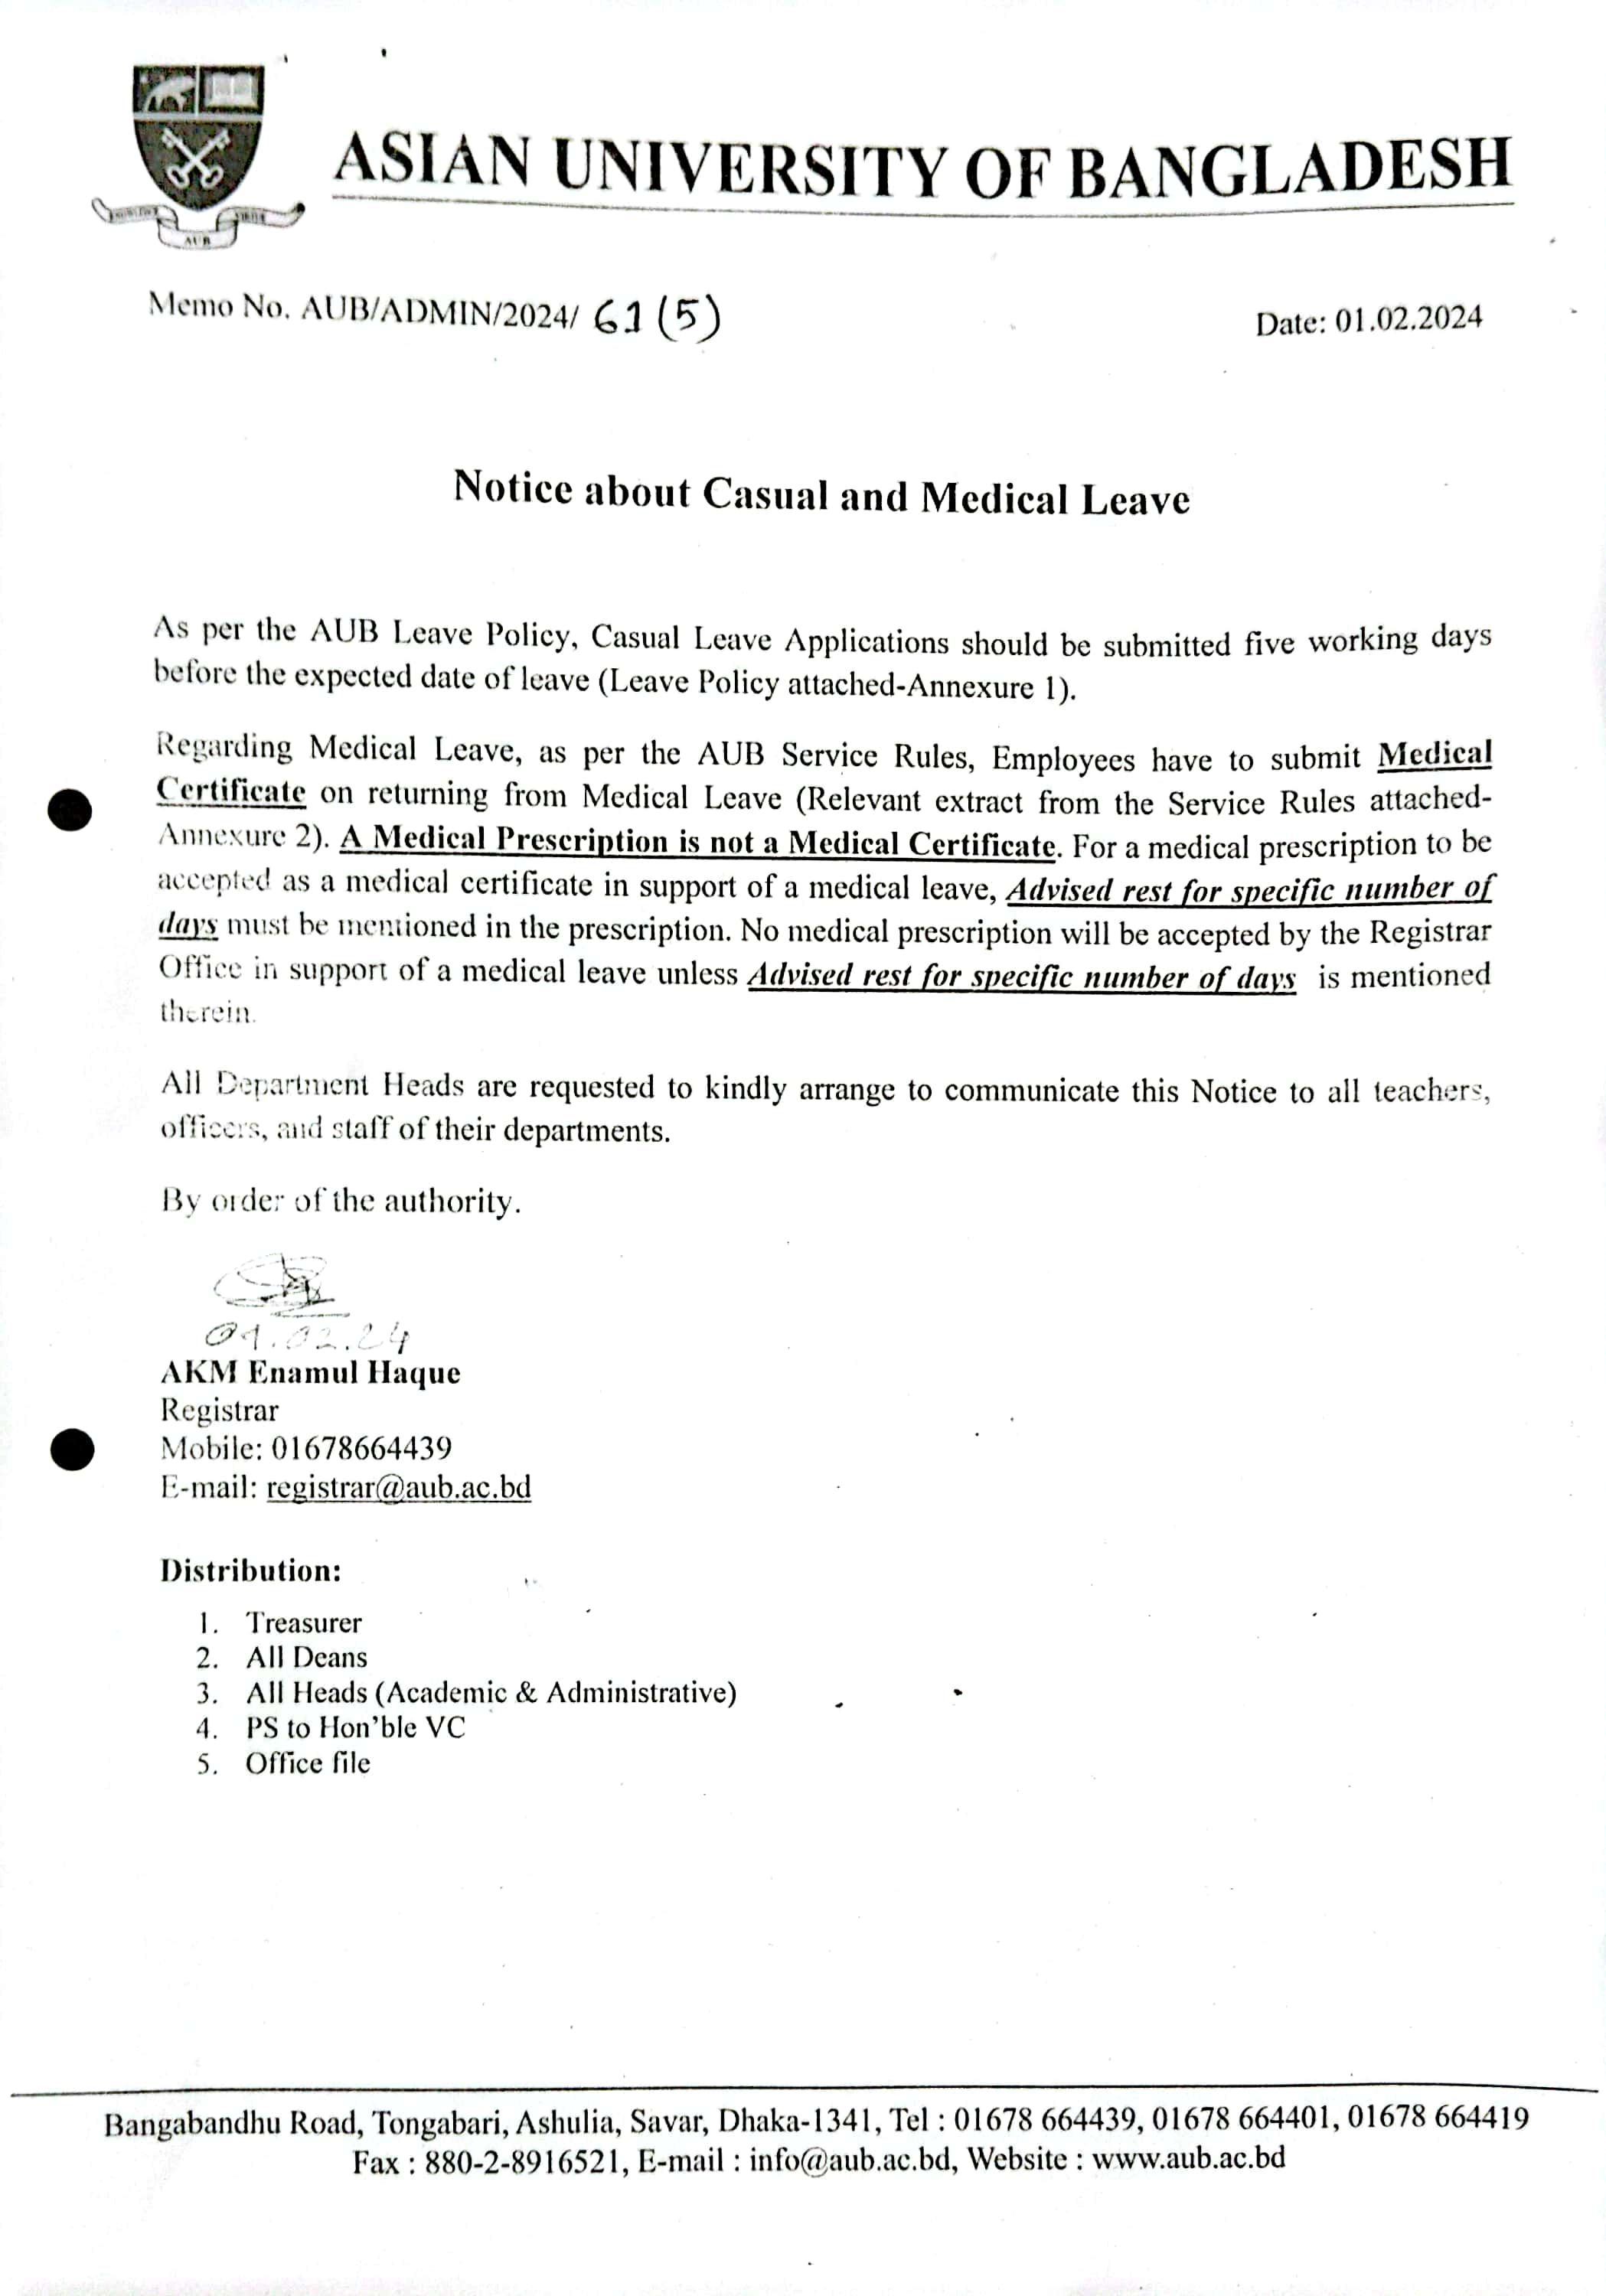 Notice about Casual & Medical Leave